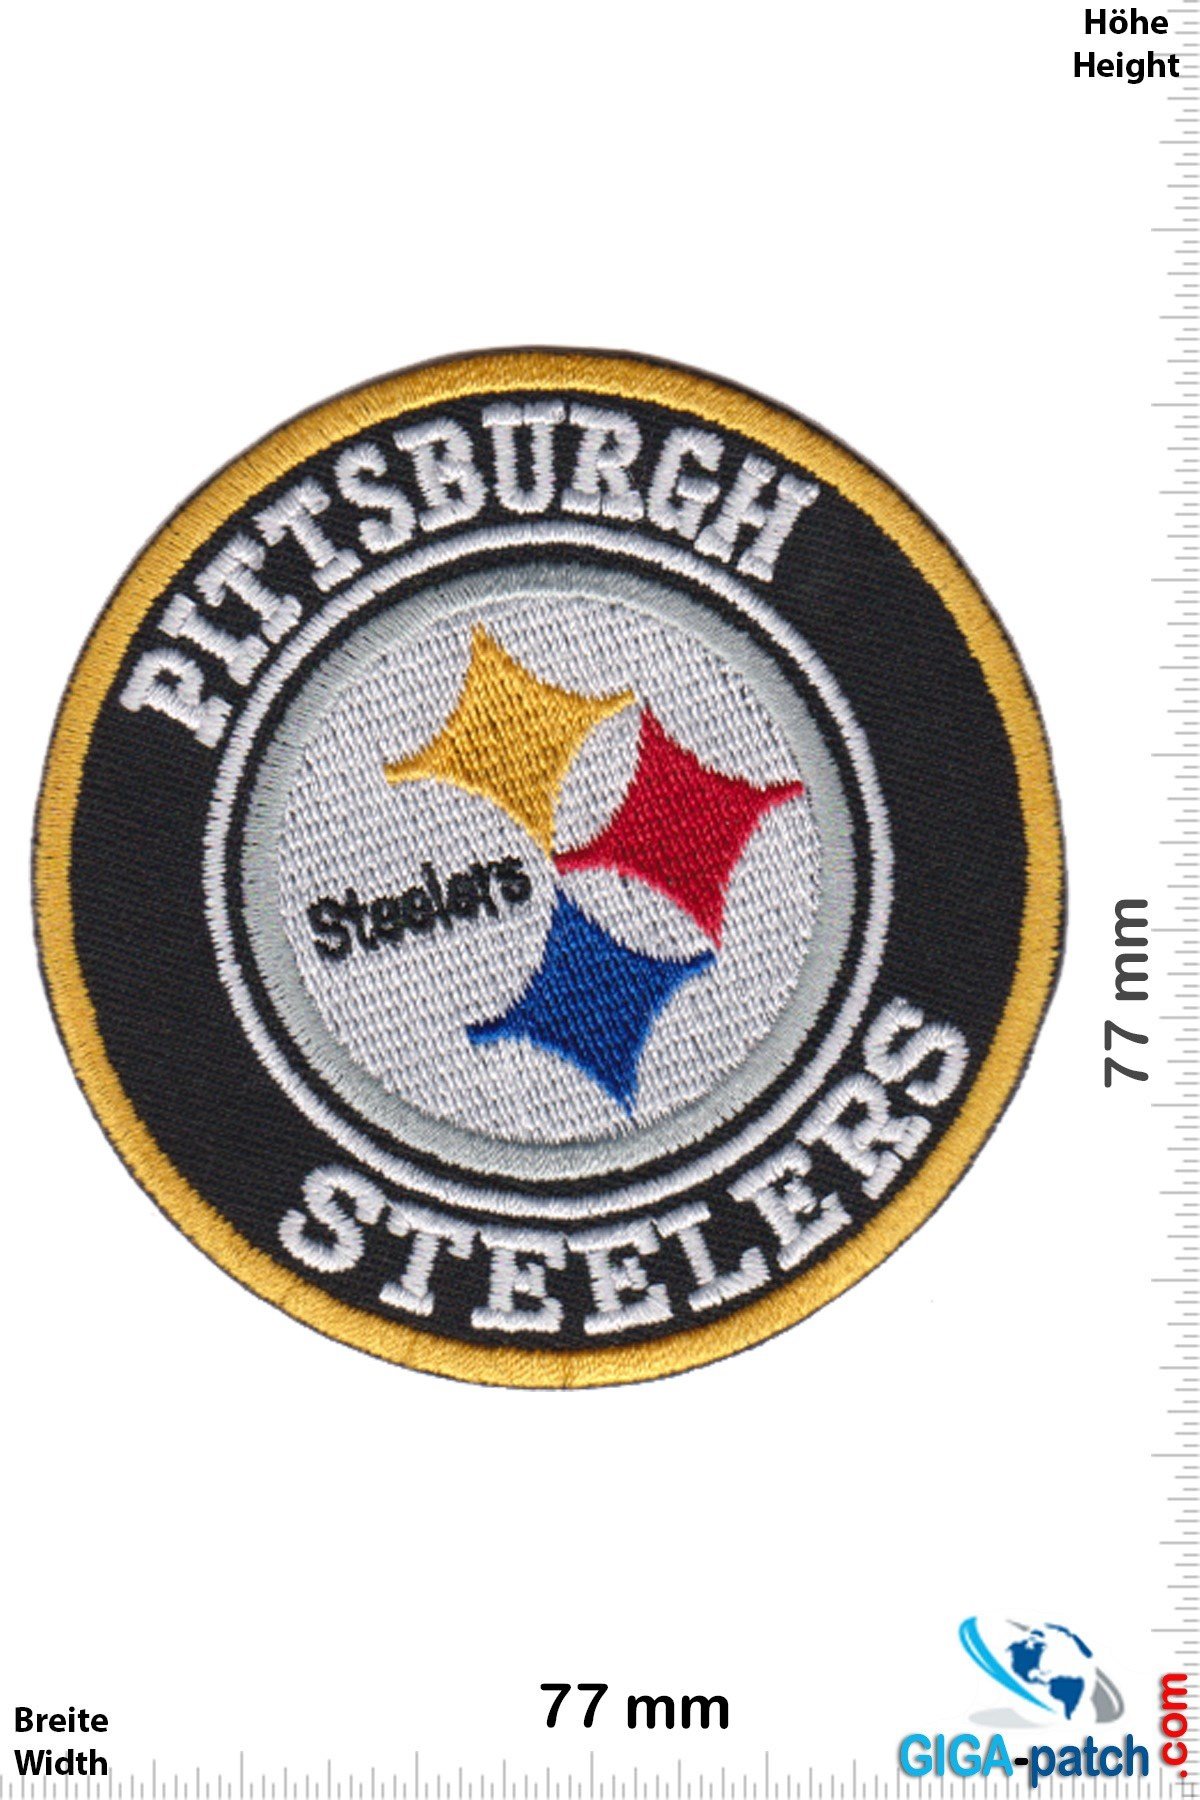 Pittsburgh Steelers Pittsburgh Steelers - round - American-Football - National Football League - NFL USA